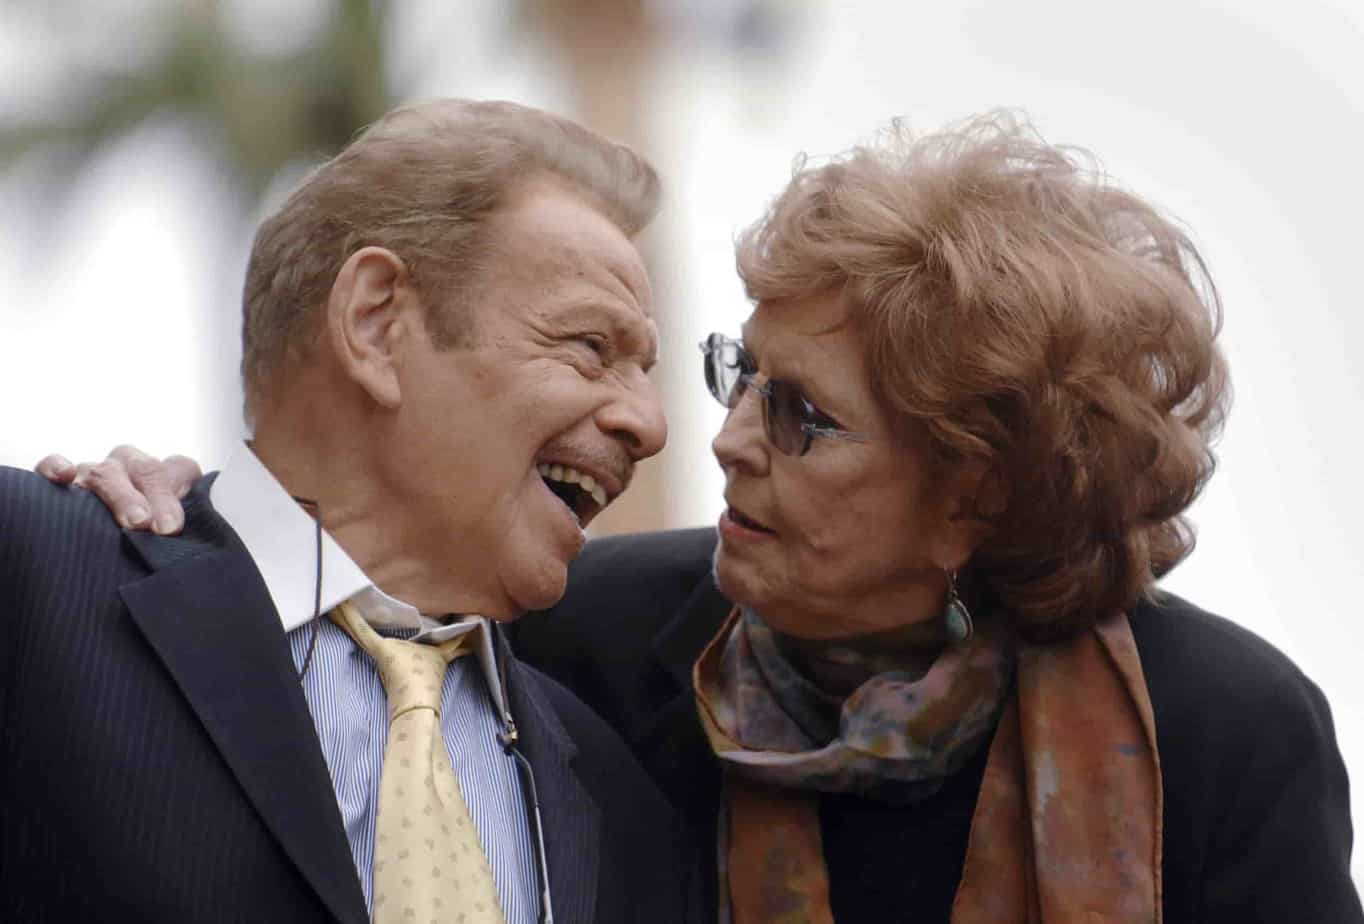 Image of Ben Stiller's father, Jerry Stiller with his wife, Anne Meara